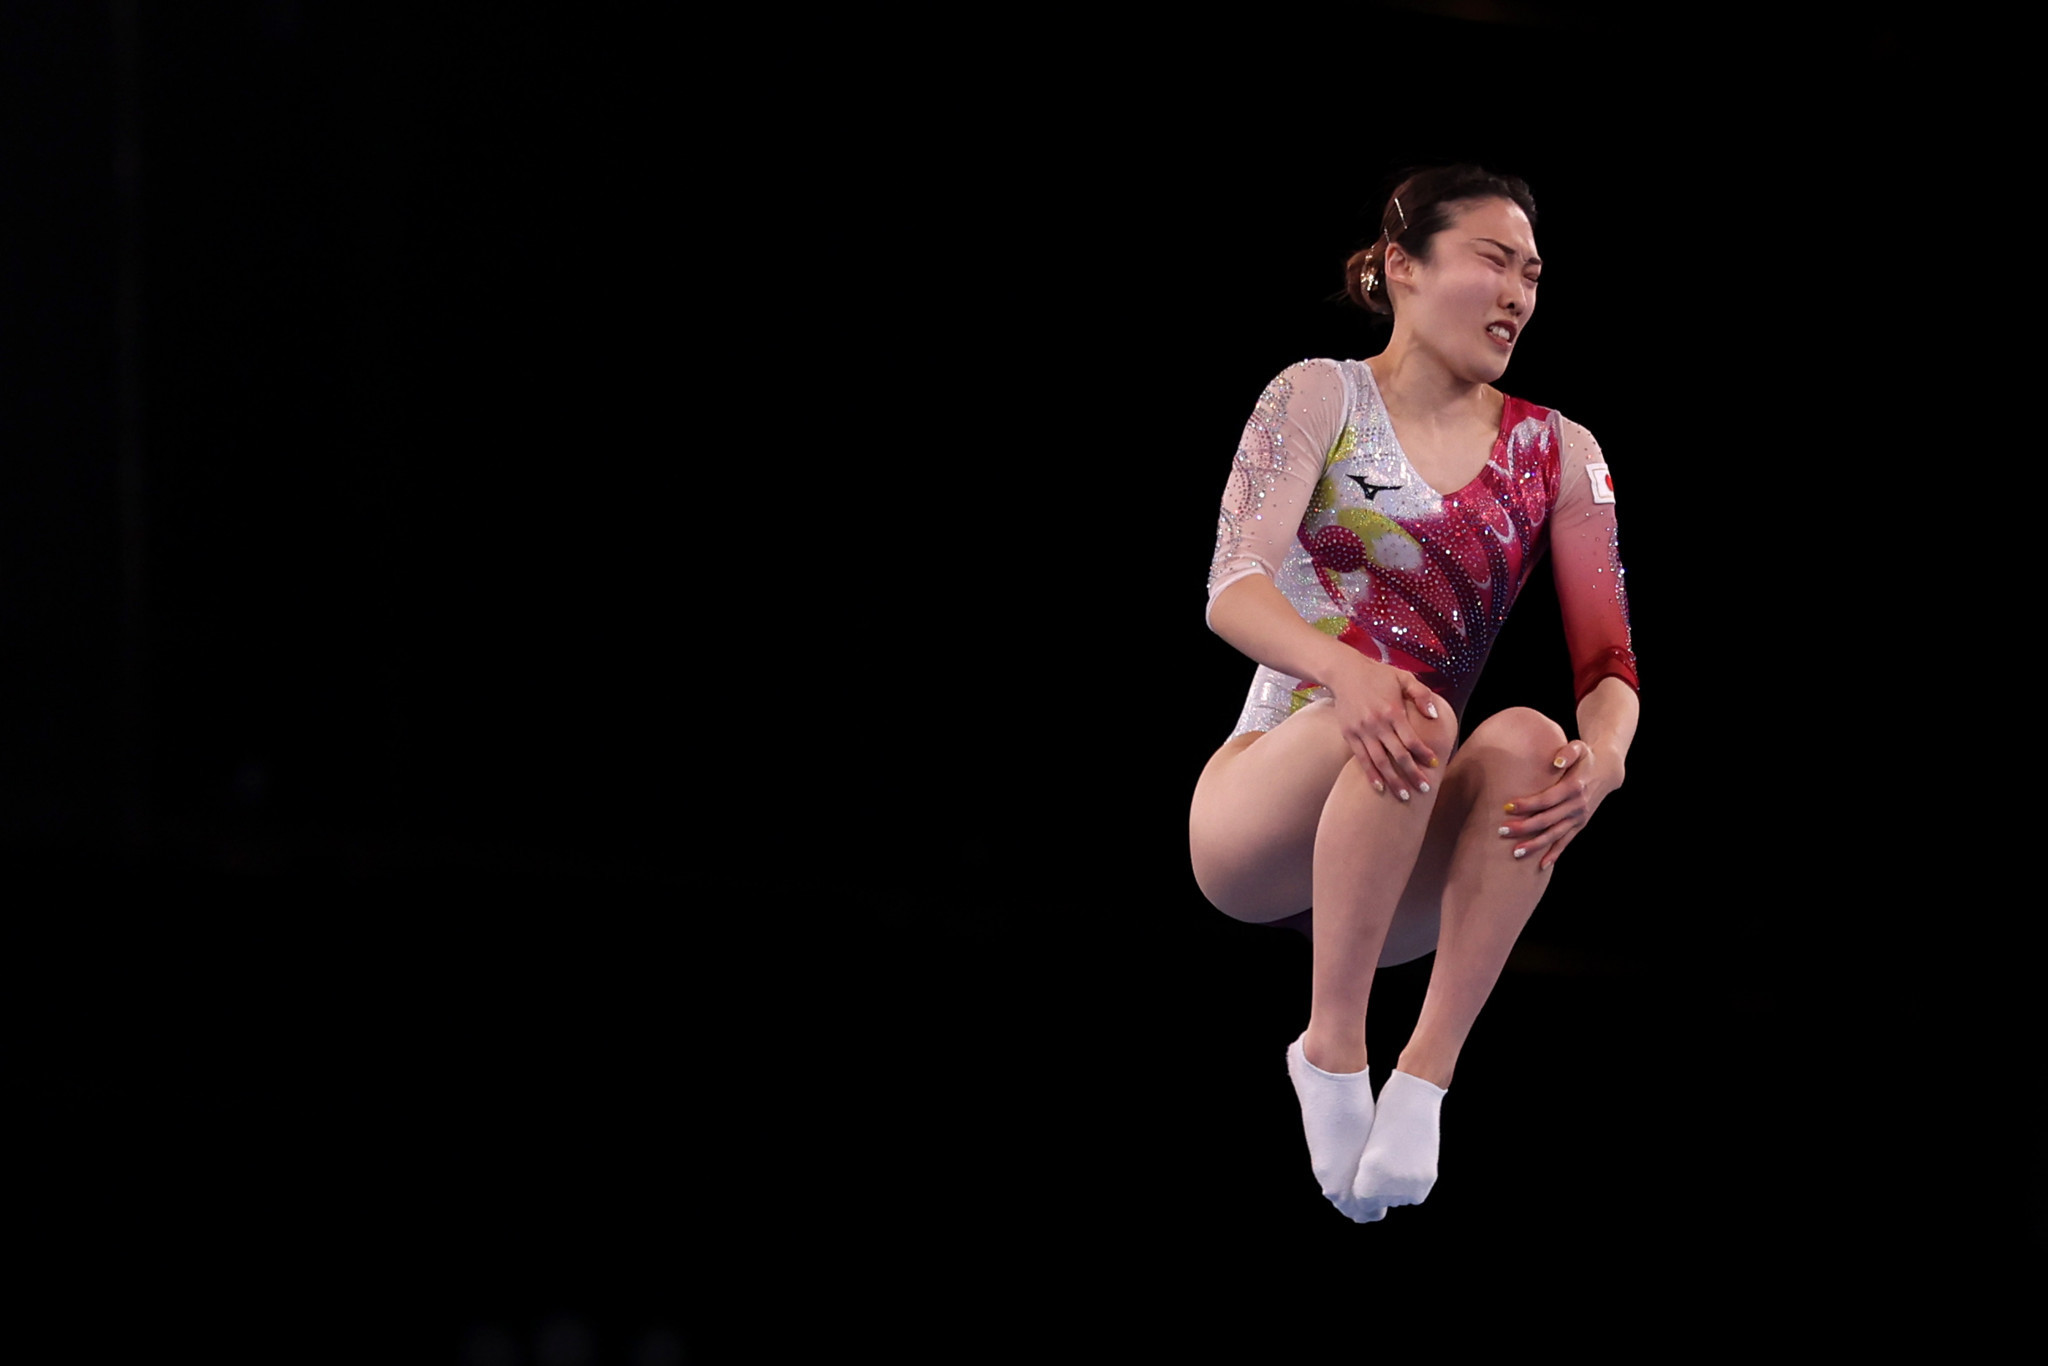 Hikaru Mori helped Japan post a winning total of 164.245 in the women's team event at the Trampoline World Championships ©Getty Images